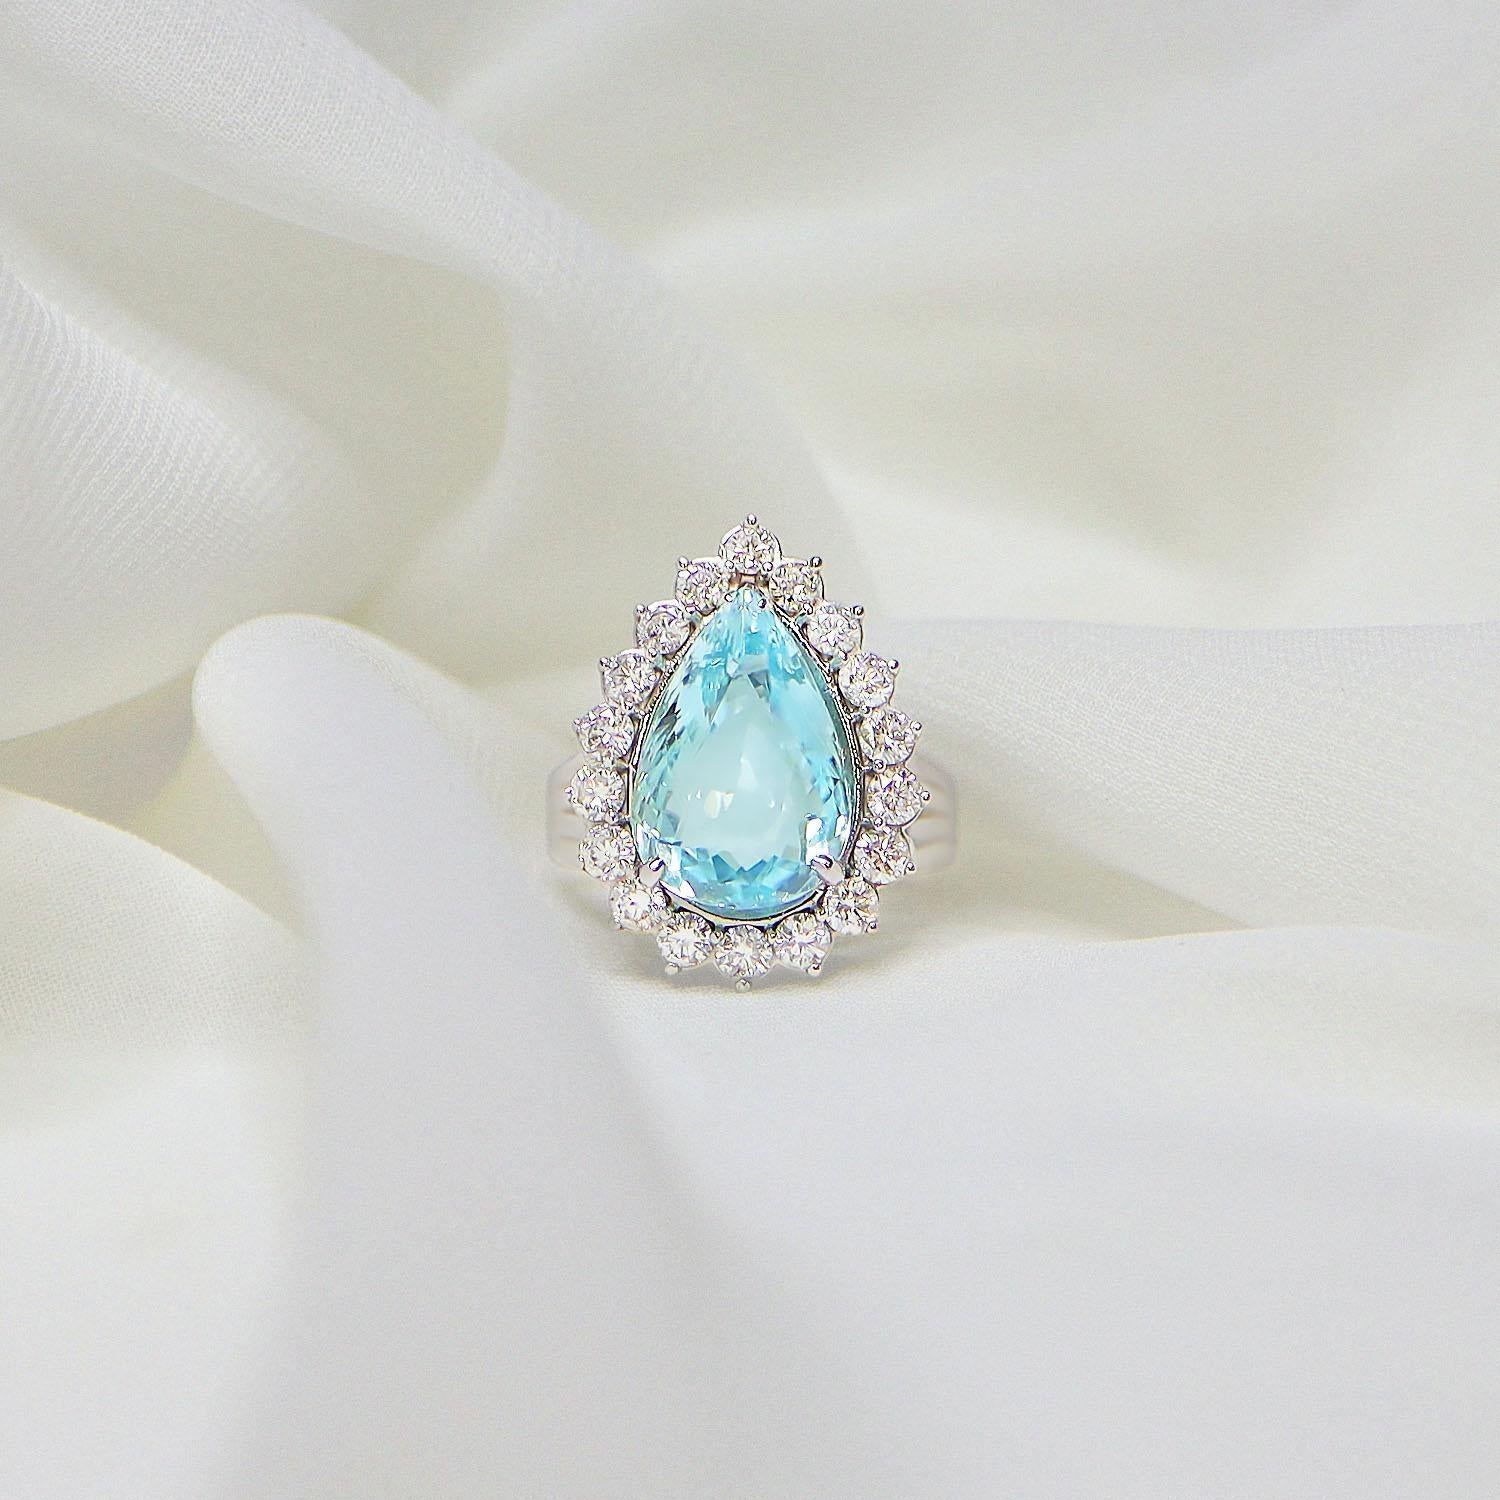 *GIA 18K 6.21 Carat Paraiba&Diamonds Art Deco Style Engagement Ring*

This stunning 6.21 ct GIA-certified natural blue Paraiba is set on an 18K white gold band adorned with natural round brilliant cut diamonds weighing 1.13 ct (FG VS quality). 
This